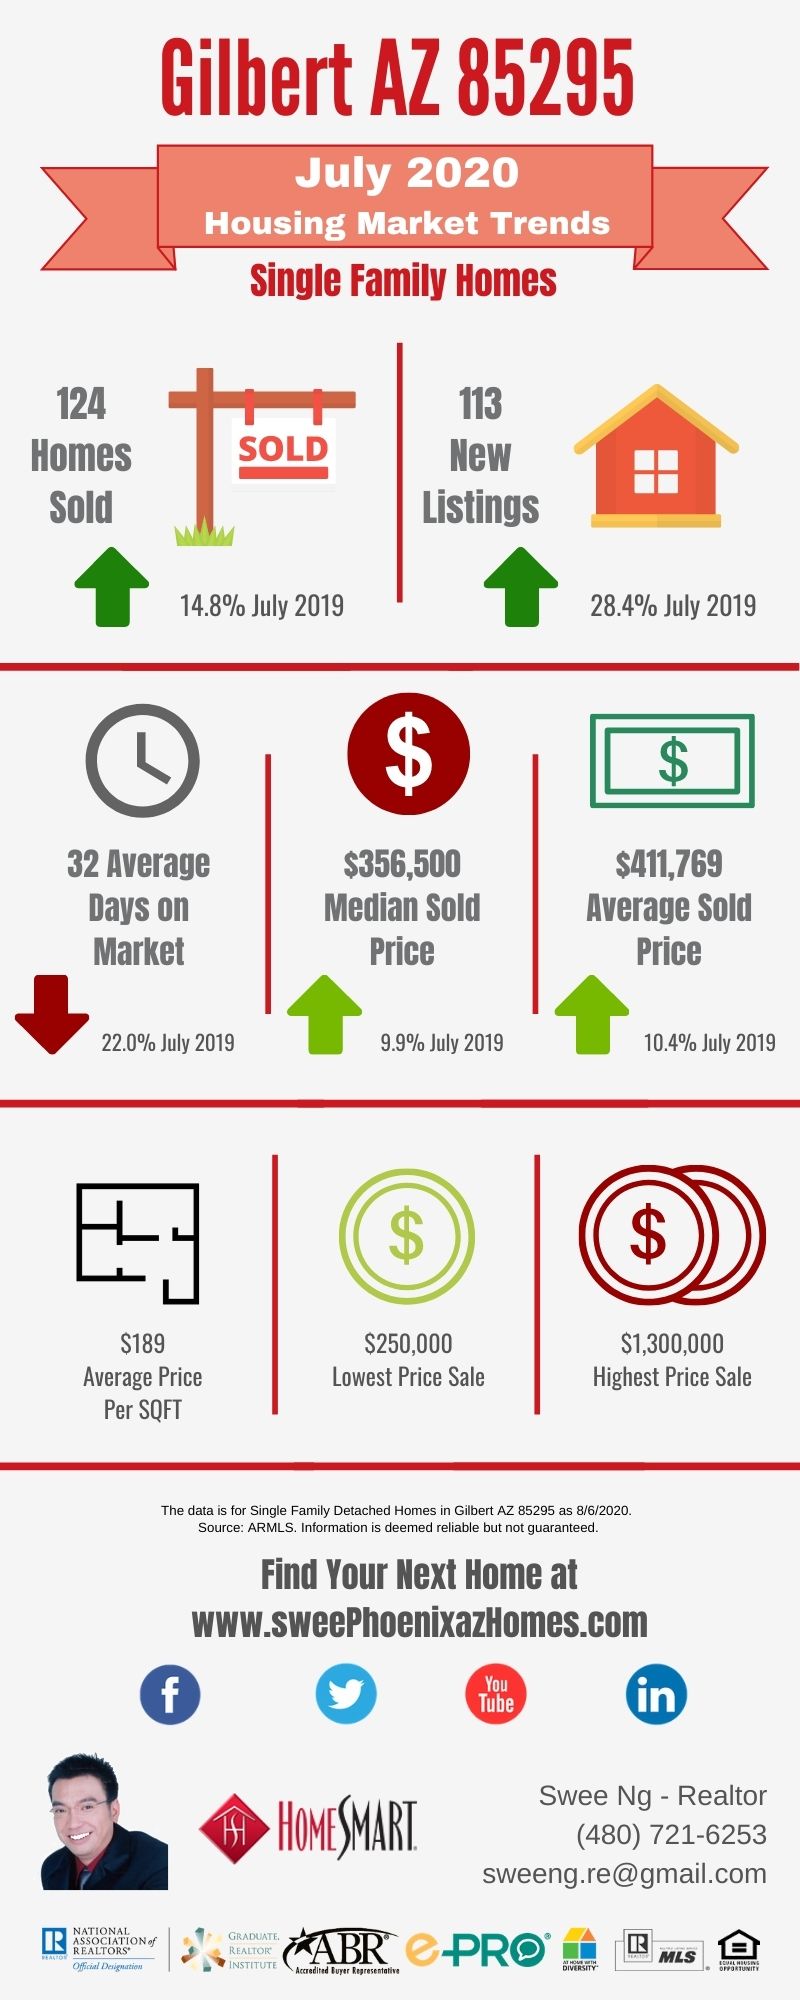 Gilbert AZ 85295 Housing Market Trends Report July 2020 by Swee Ng, Real Estate and House Value